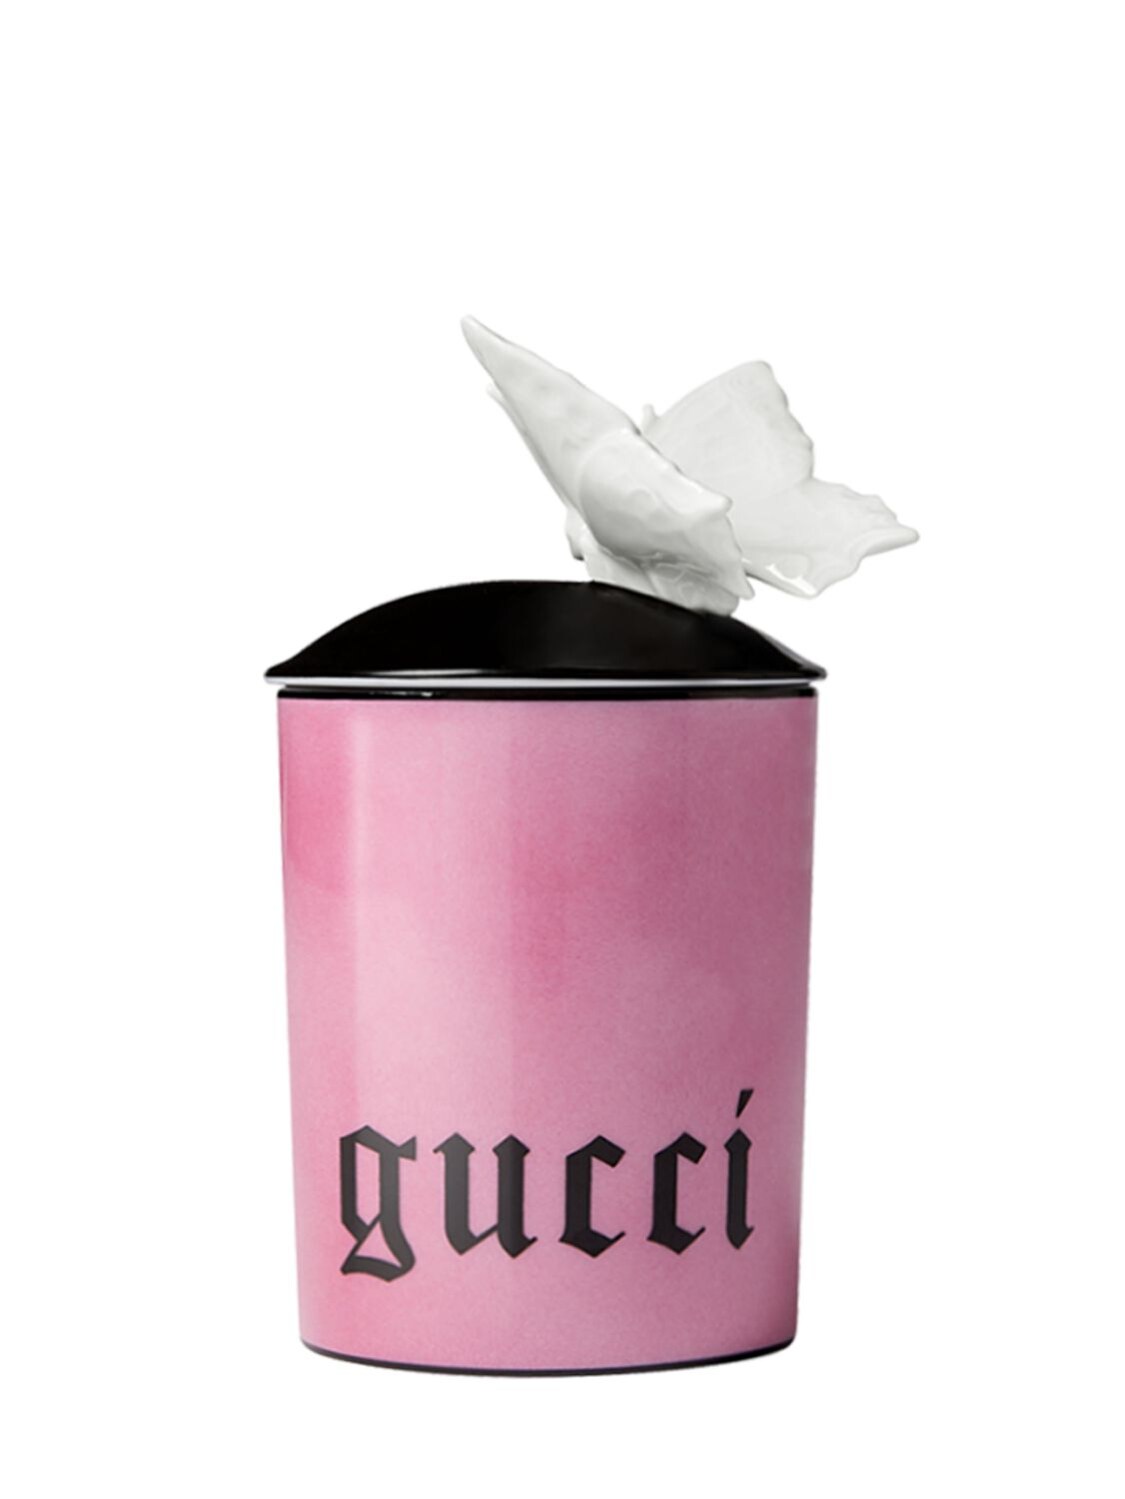 GUCCI INVENTUM BUTTERFLY - SCENTED CANDLE,68IWNI004-NTY3NQ2